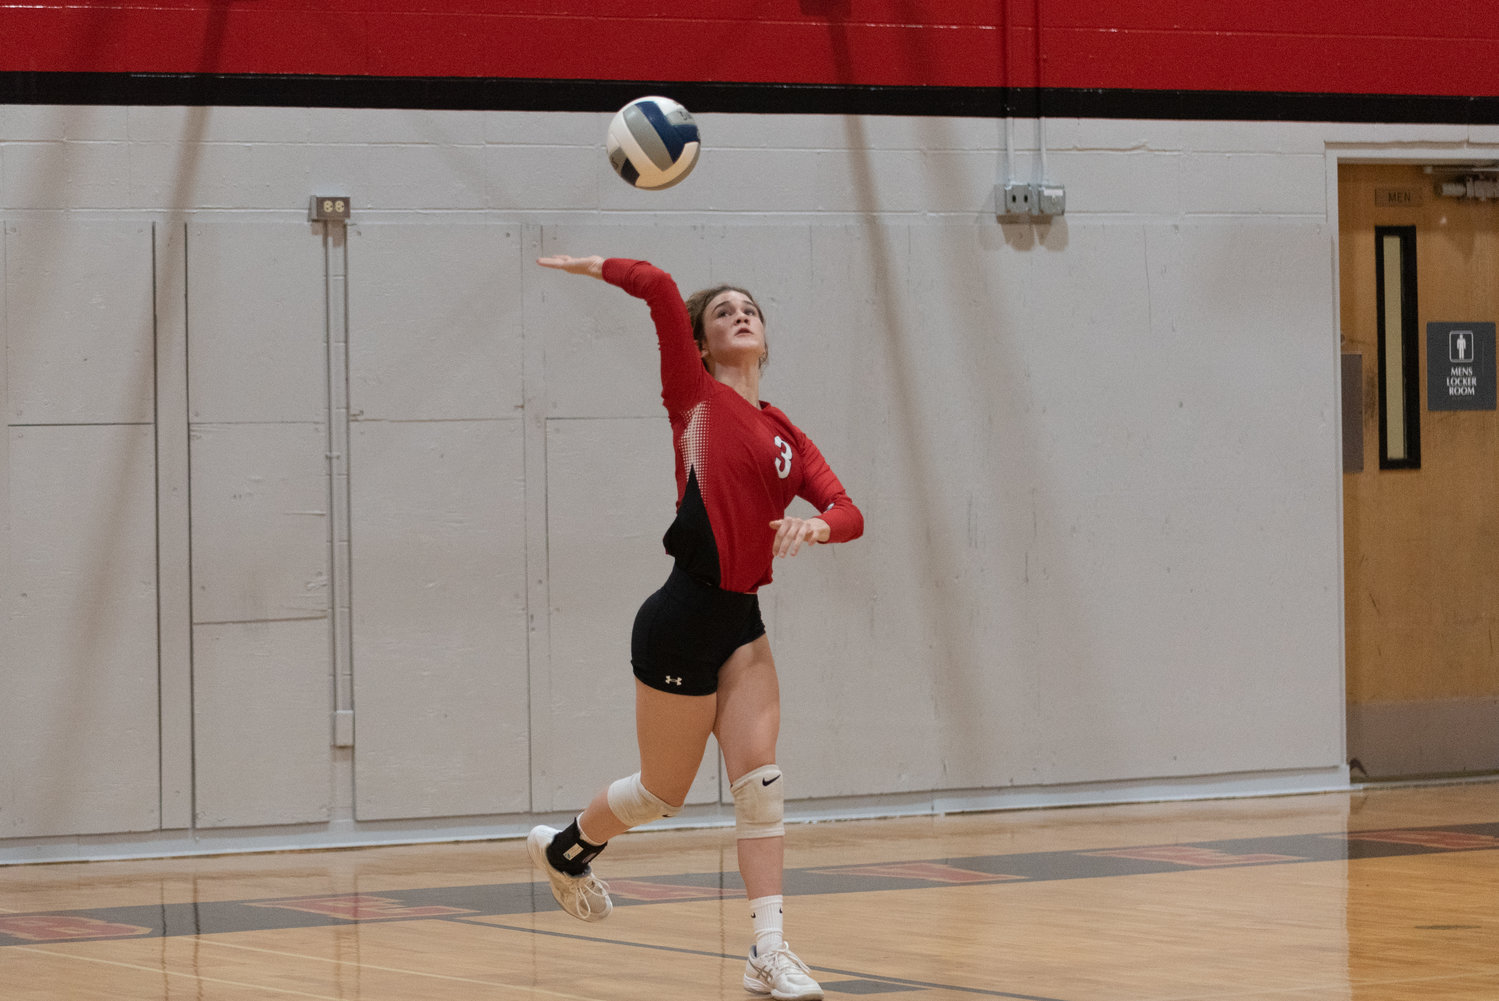 Brooke Bratton serves the ball during the first set of Tenino's home loss to Centralia on Sept. 14.